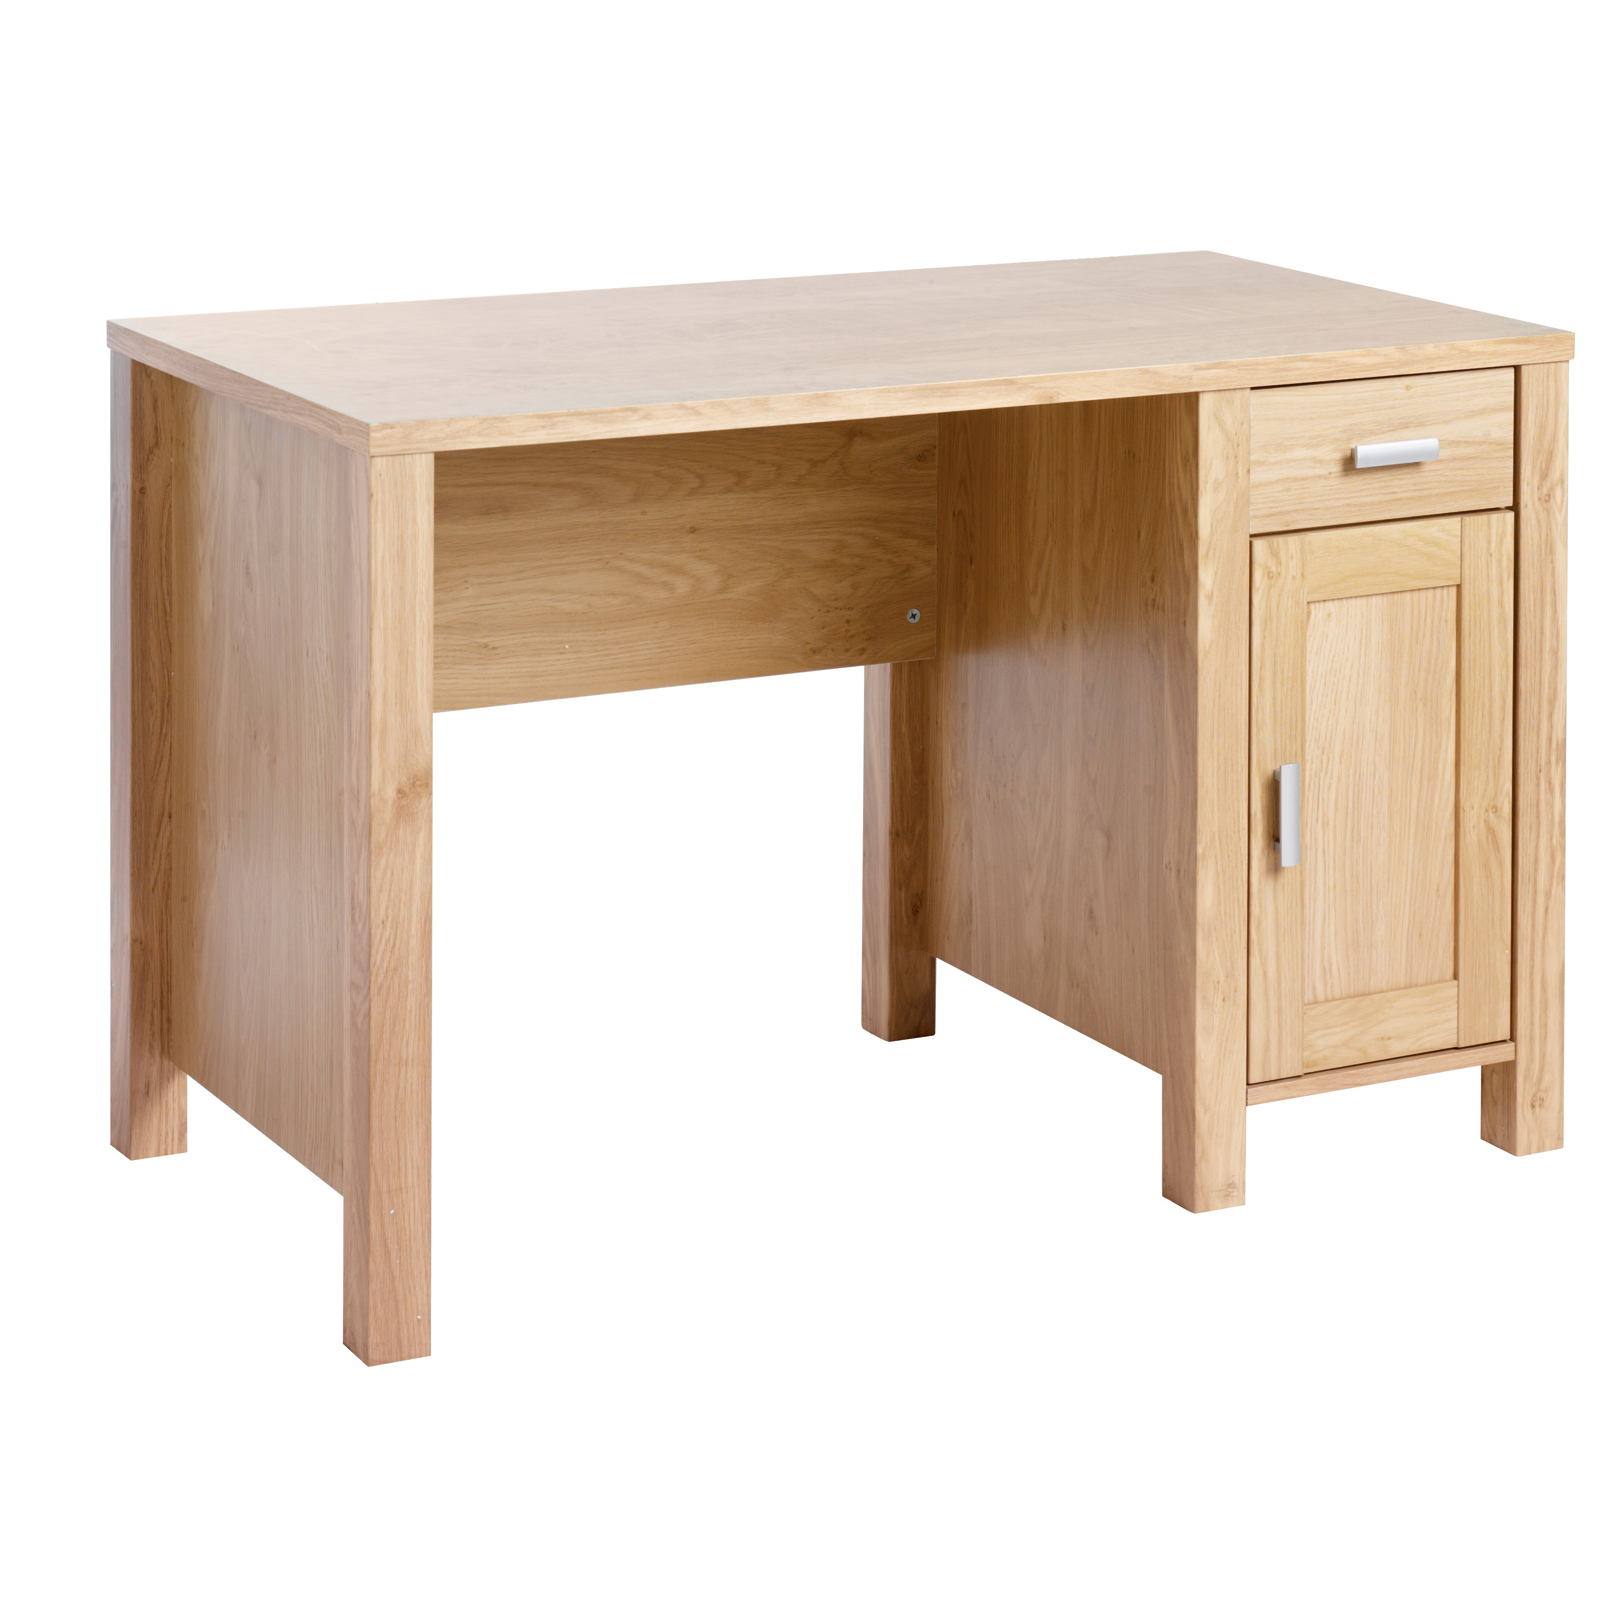 Rectangular Desks Amazon home office workstation with integrated drawer and cupboard unit - oak effect